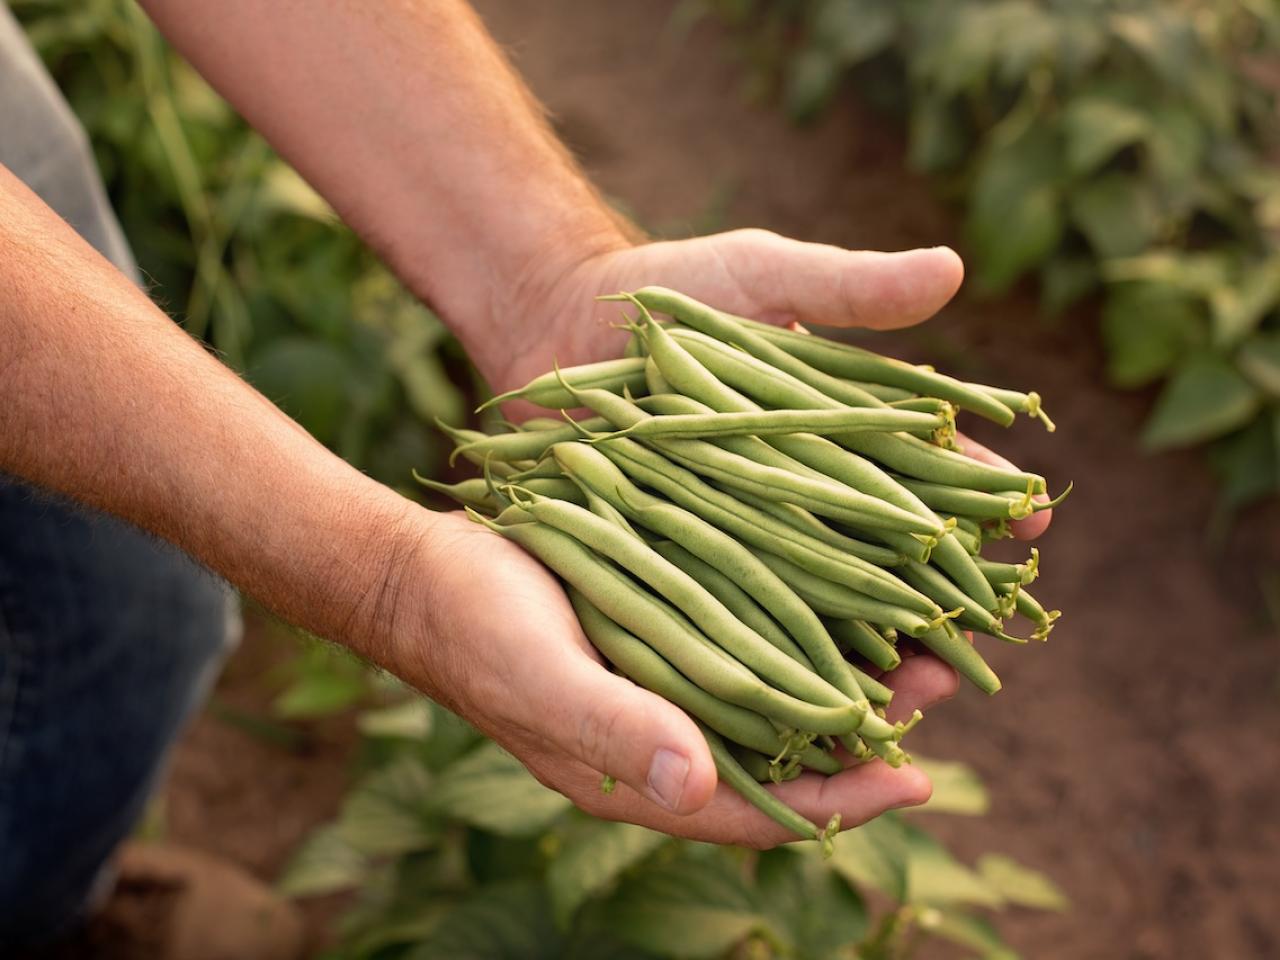 Freshly grown green beans shown in the farmers hand.